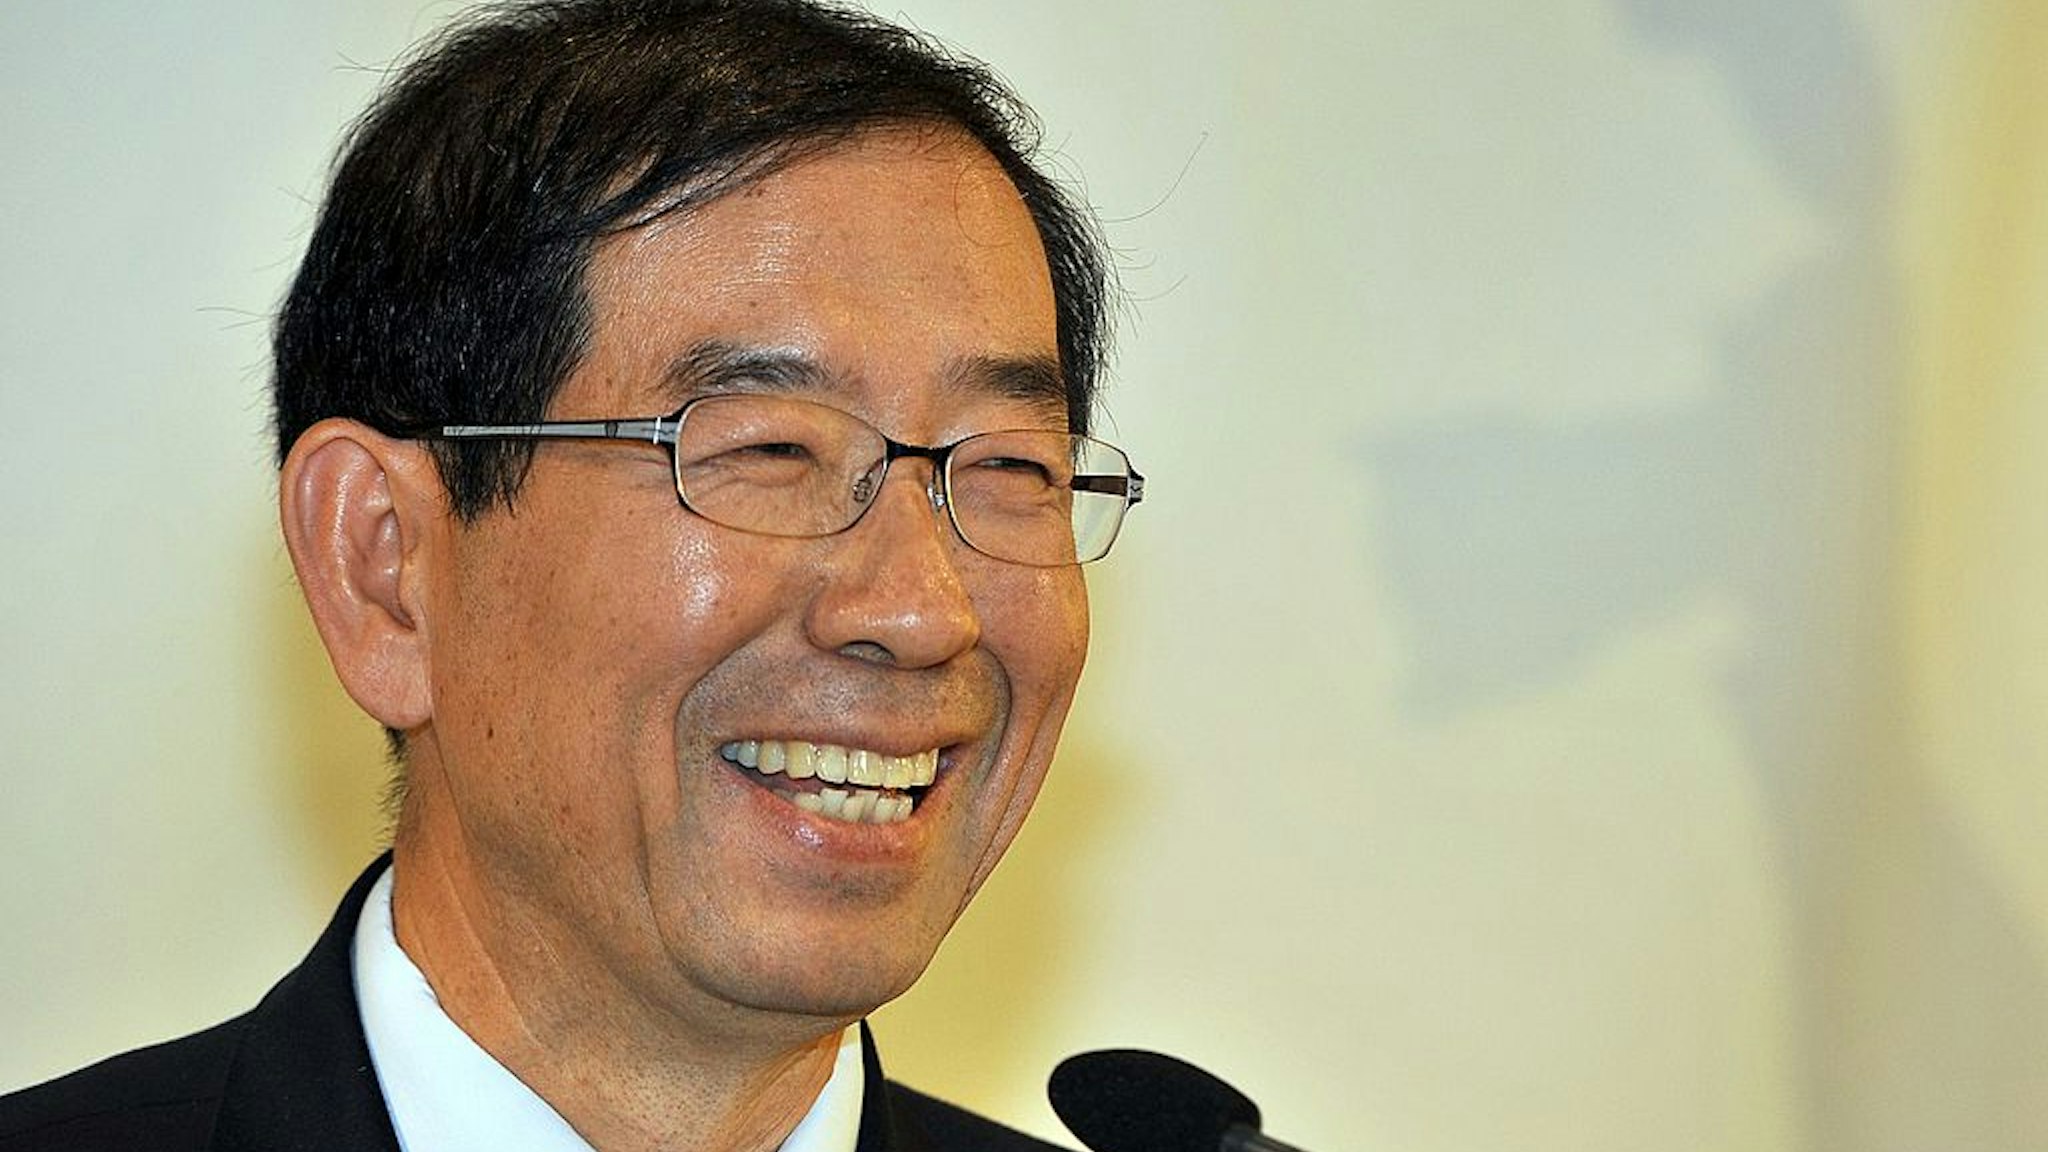 Seoul mayor Park Won-Soon speaks during a press conference for foreign correspondents in Seoul on November 9, 2011.